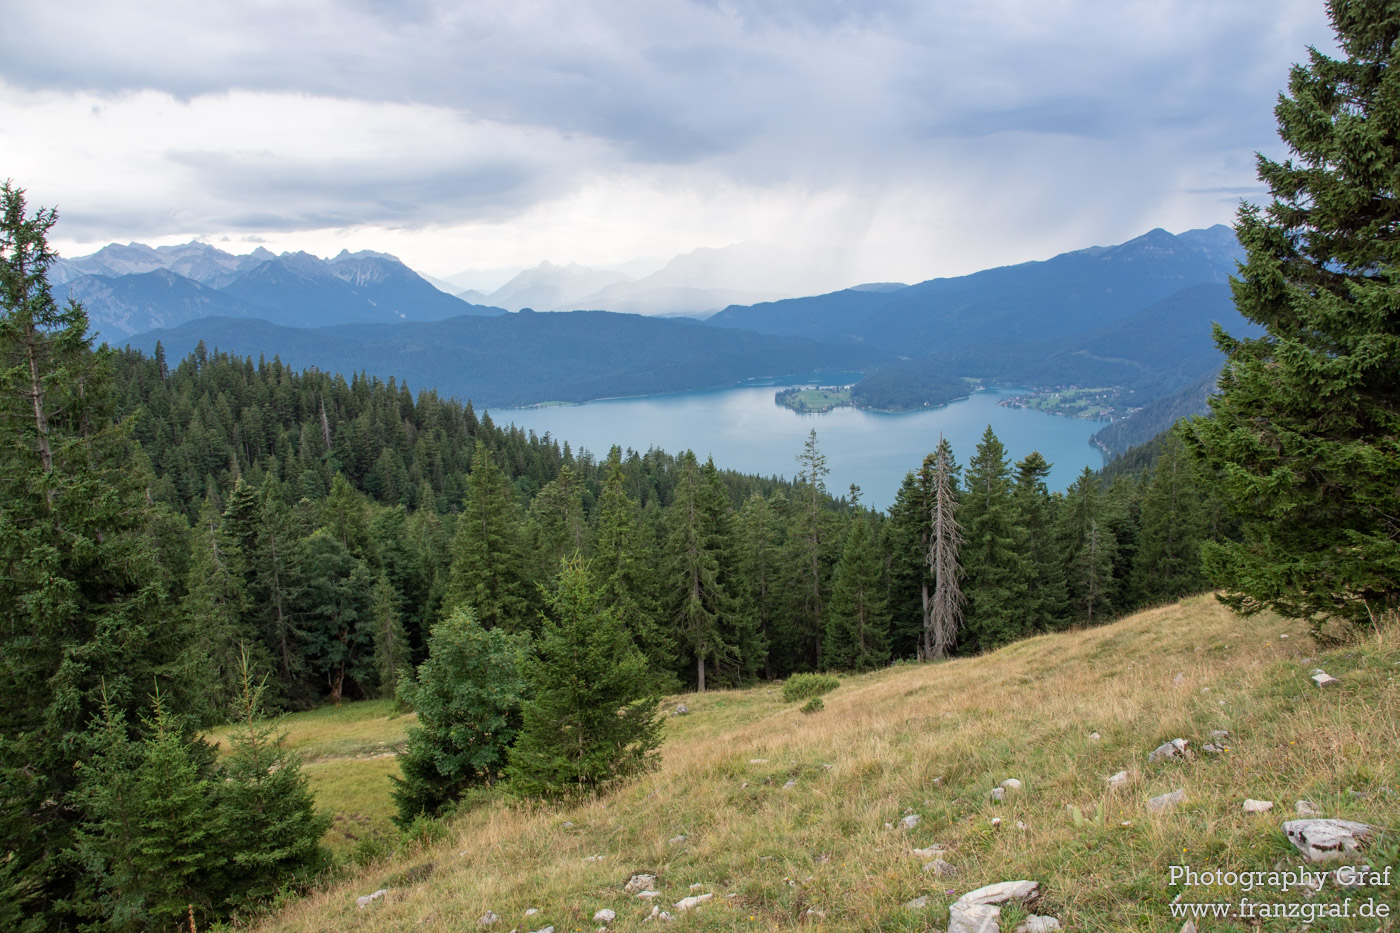 This stunning landscape features a tranquil lake nestled between majestic snow-capped mountains. A dense forest of tall, lush trees surrounds the lake, providing a peaceful atmosphere. In the foreground, a grassy hill is dotted with rocks, and a single tree stands tall, its many leaves rustling in the wind. The sky above is cloudy and grey, but the sun still manages to peek through the clouds, casting its light on the lake and the forest beyond. This is a perfect spot for a peaceful escape, where one can take in the beauty of nature and relax.